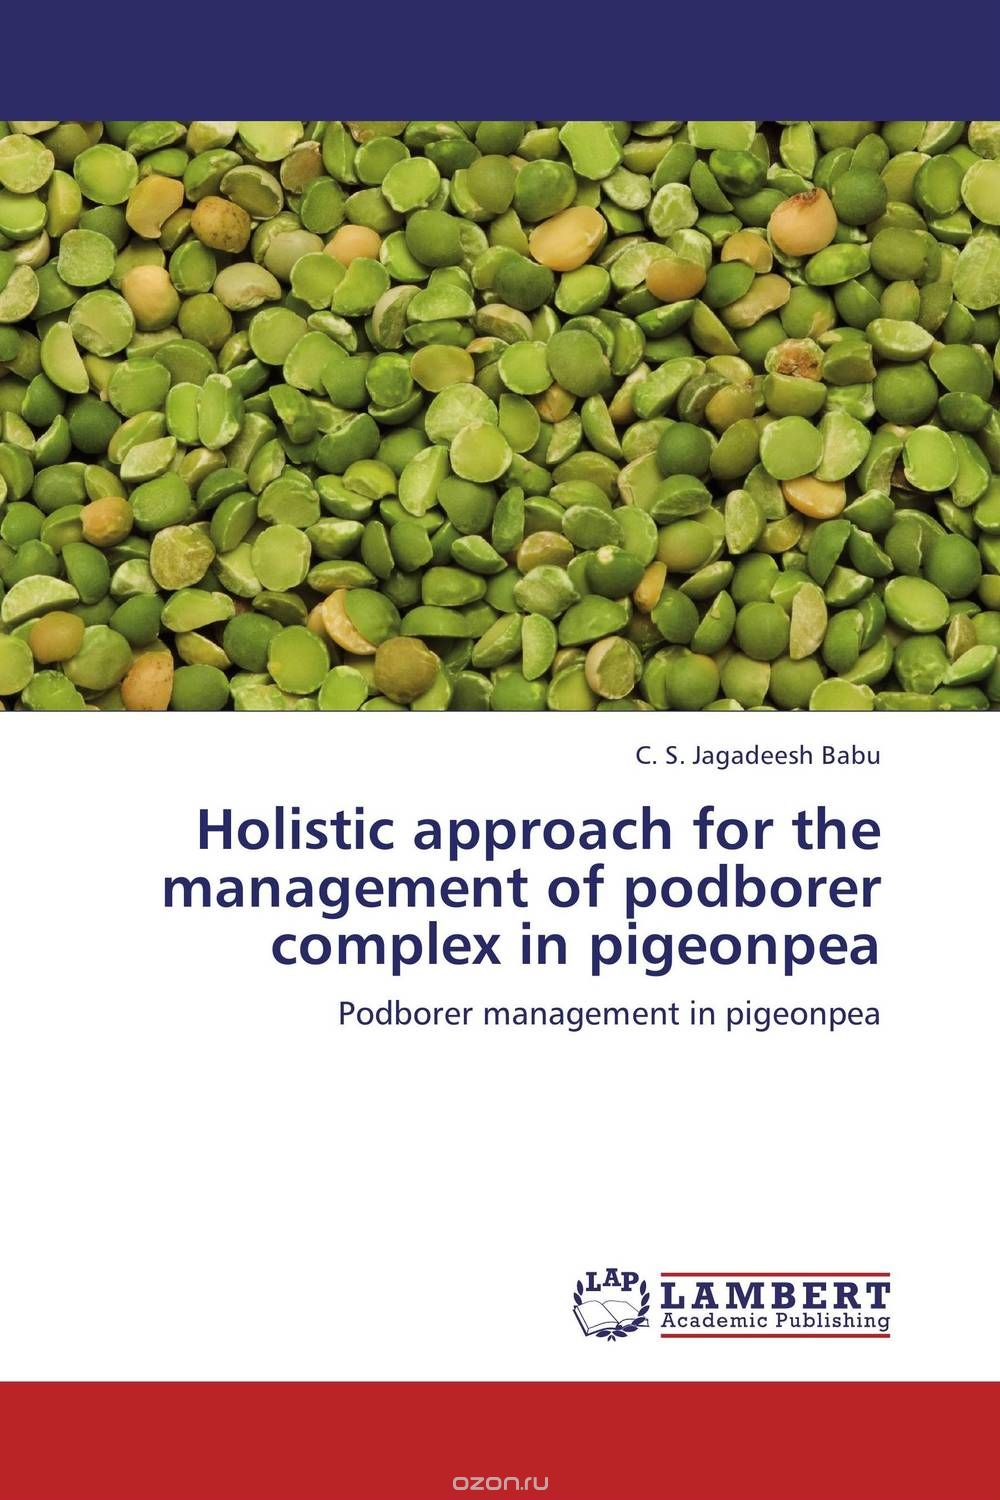 Скачать книгу "Holistic approach for the management of podborer complex in pigeonpea"